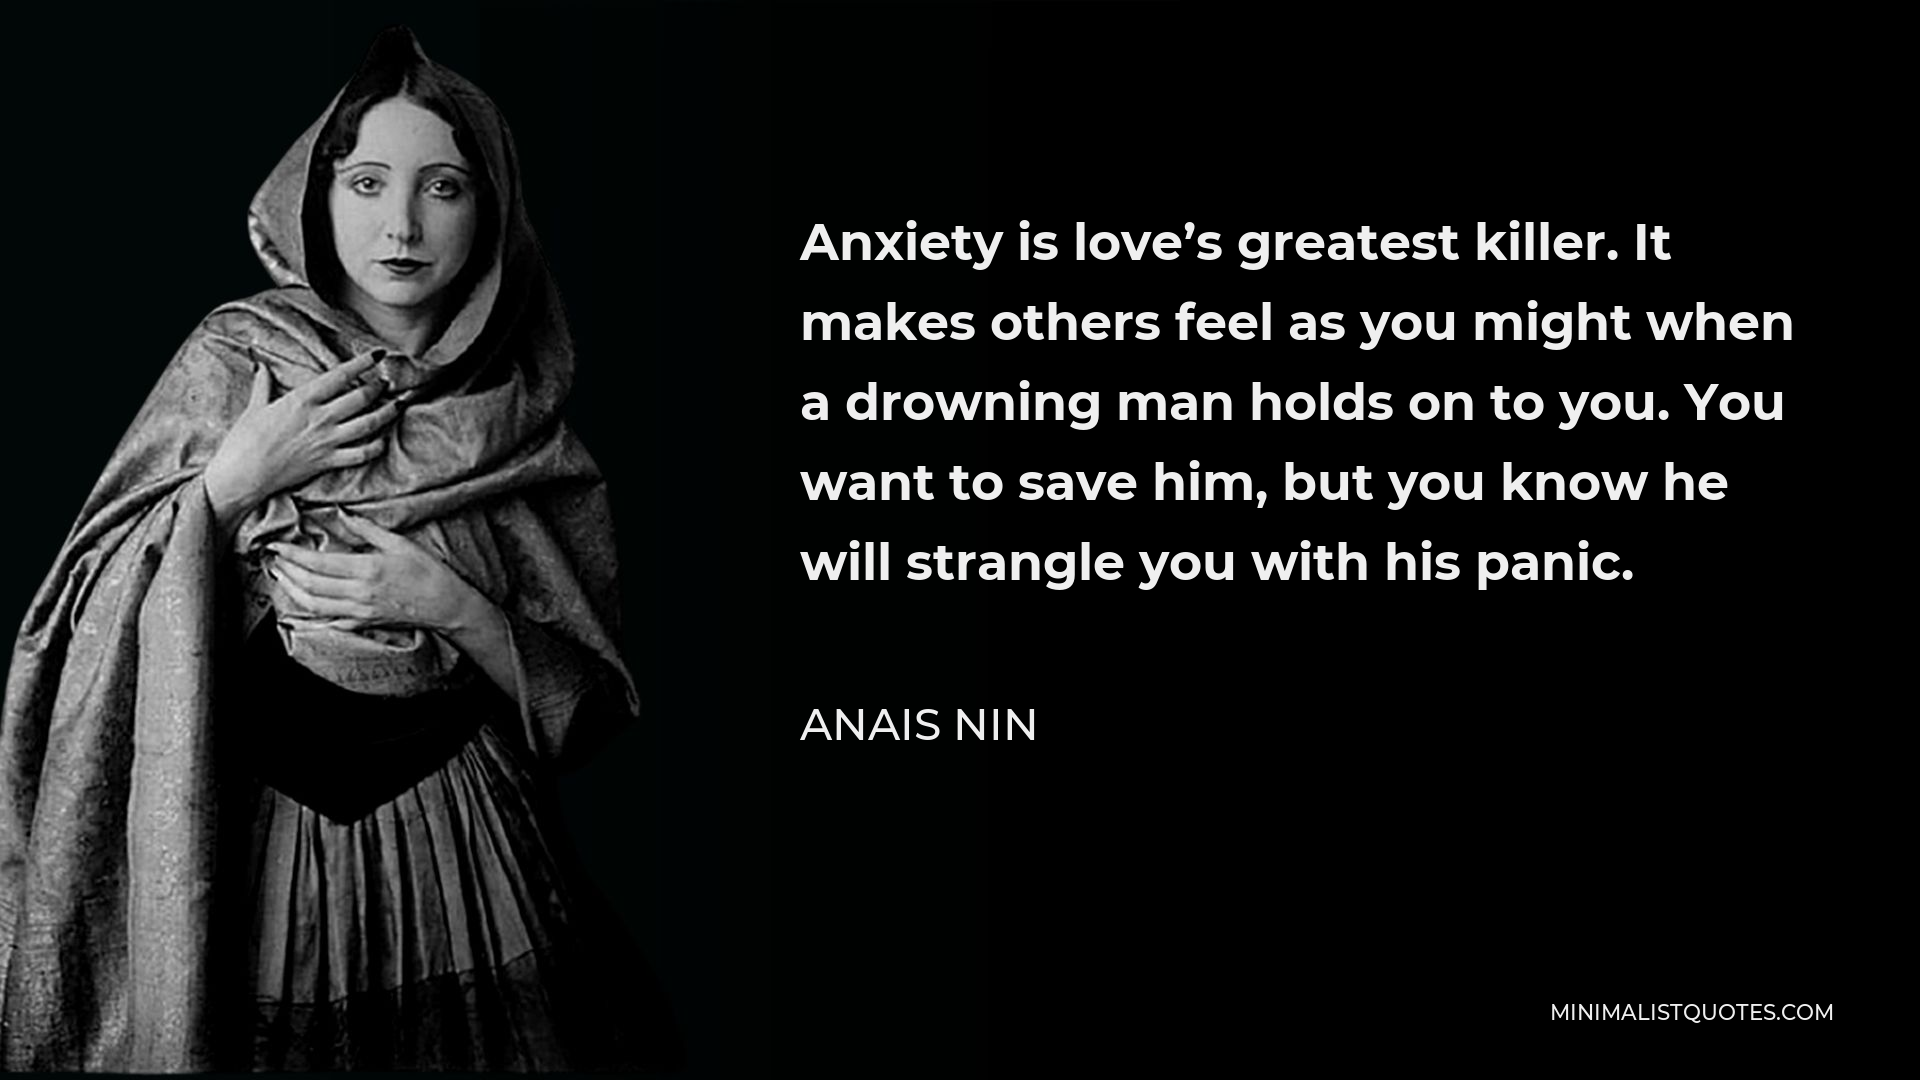 Anais Nin Quote - Anxiety is love’s greatest killer. It makes others feel as you might when a drowning man holds on to you. You want to save him, but you know he will strangle you with his panic.